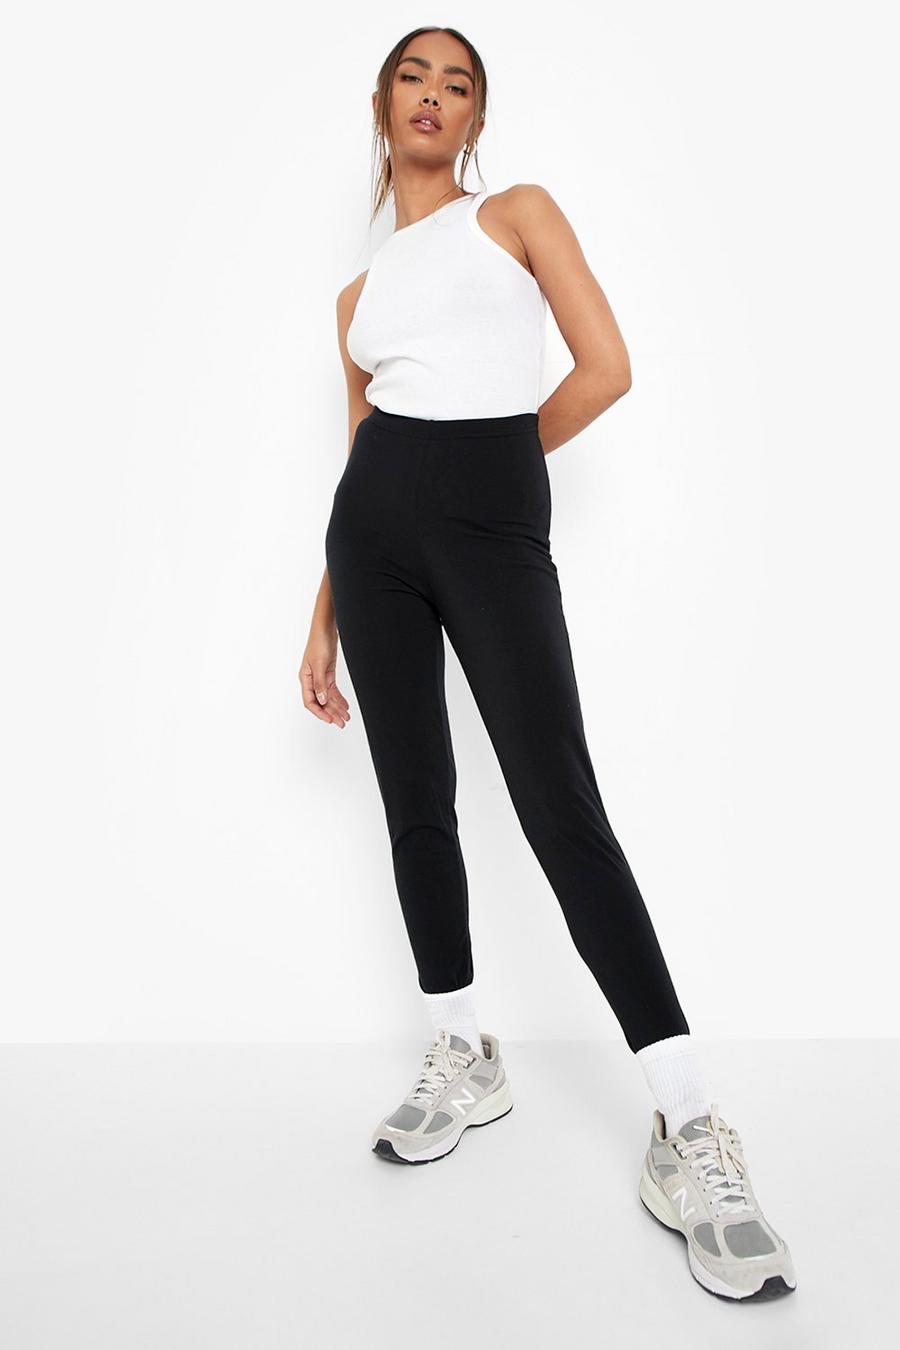 Black noir High Waisted Ruched Bum Booty Boost Leggings